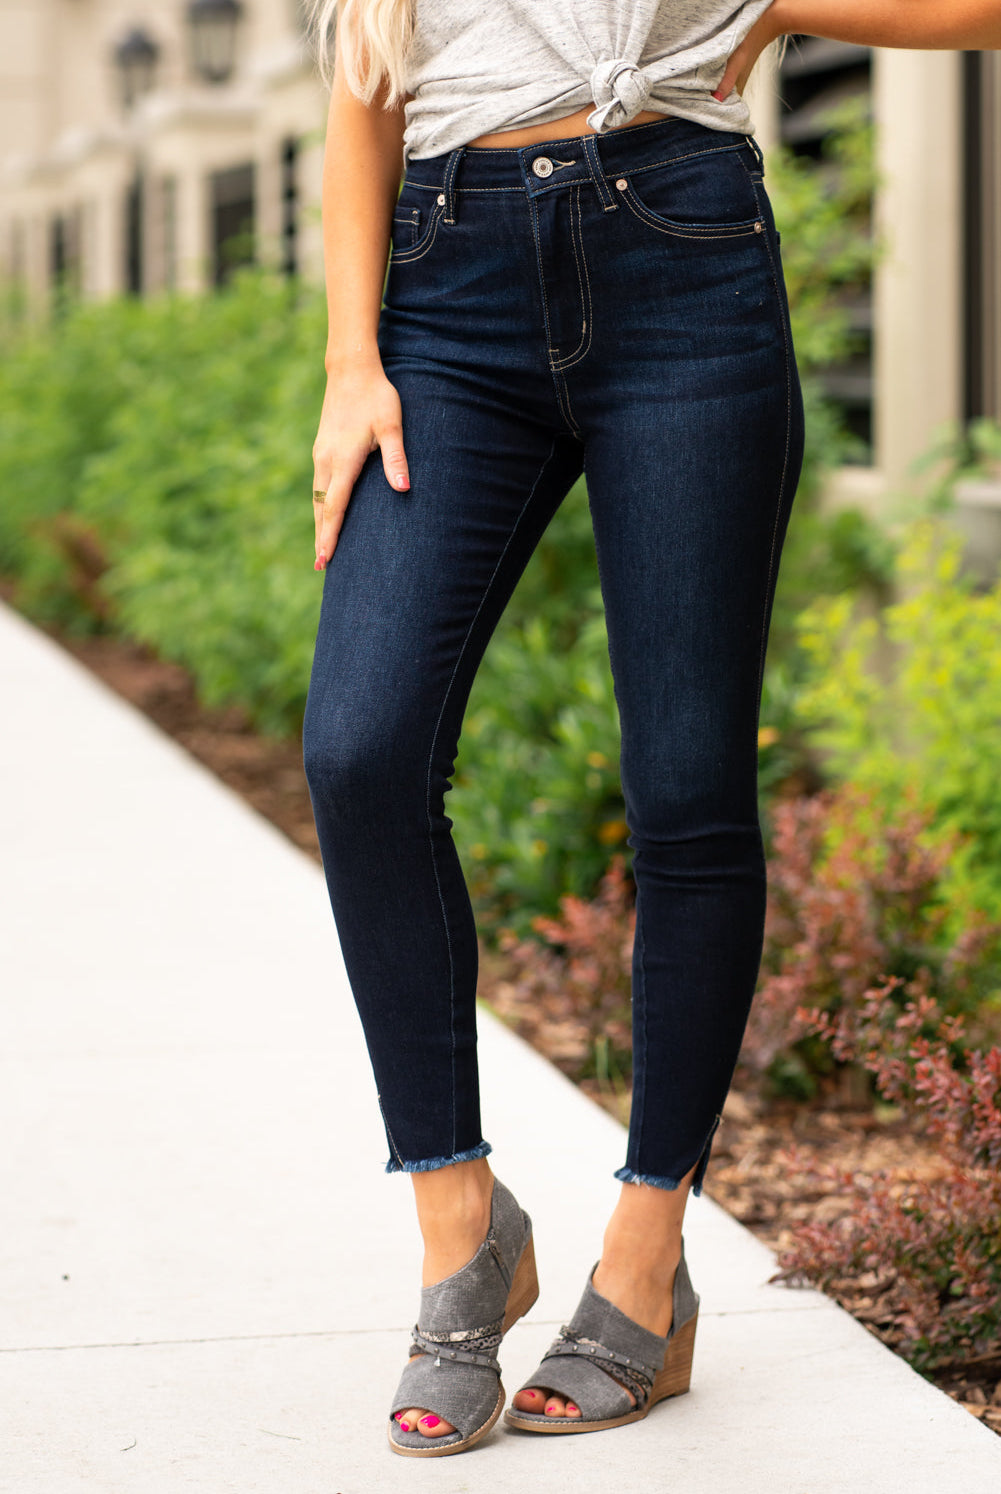 KanCan Jeans These high rise dark wash skinny jeans have a spilt fray hem and fit above the ankles so you can show off you sandals this summer. Color: Dark Blue Cut: Skinny, 27.5" Inseam Rise: High-Rise, 10.5" Front Rise COTTON 71% POLYESTER 27% SPANDEX 2% Stitching: Classic Fly: Zipper Style #: KC8604D Contact us for any additional measurements or sizing.  Cas is 5'7", wears a size 25 jeans, small top and 8 shoe. She is wearing a size 25/3 in these jeans. 